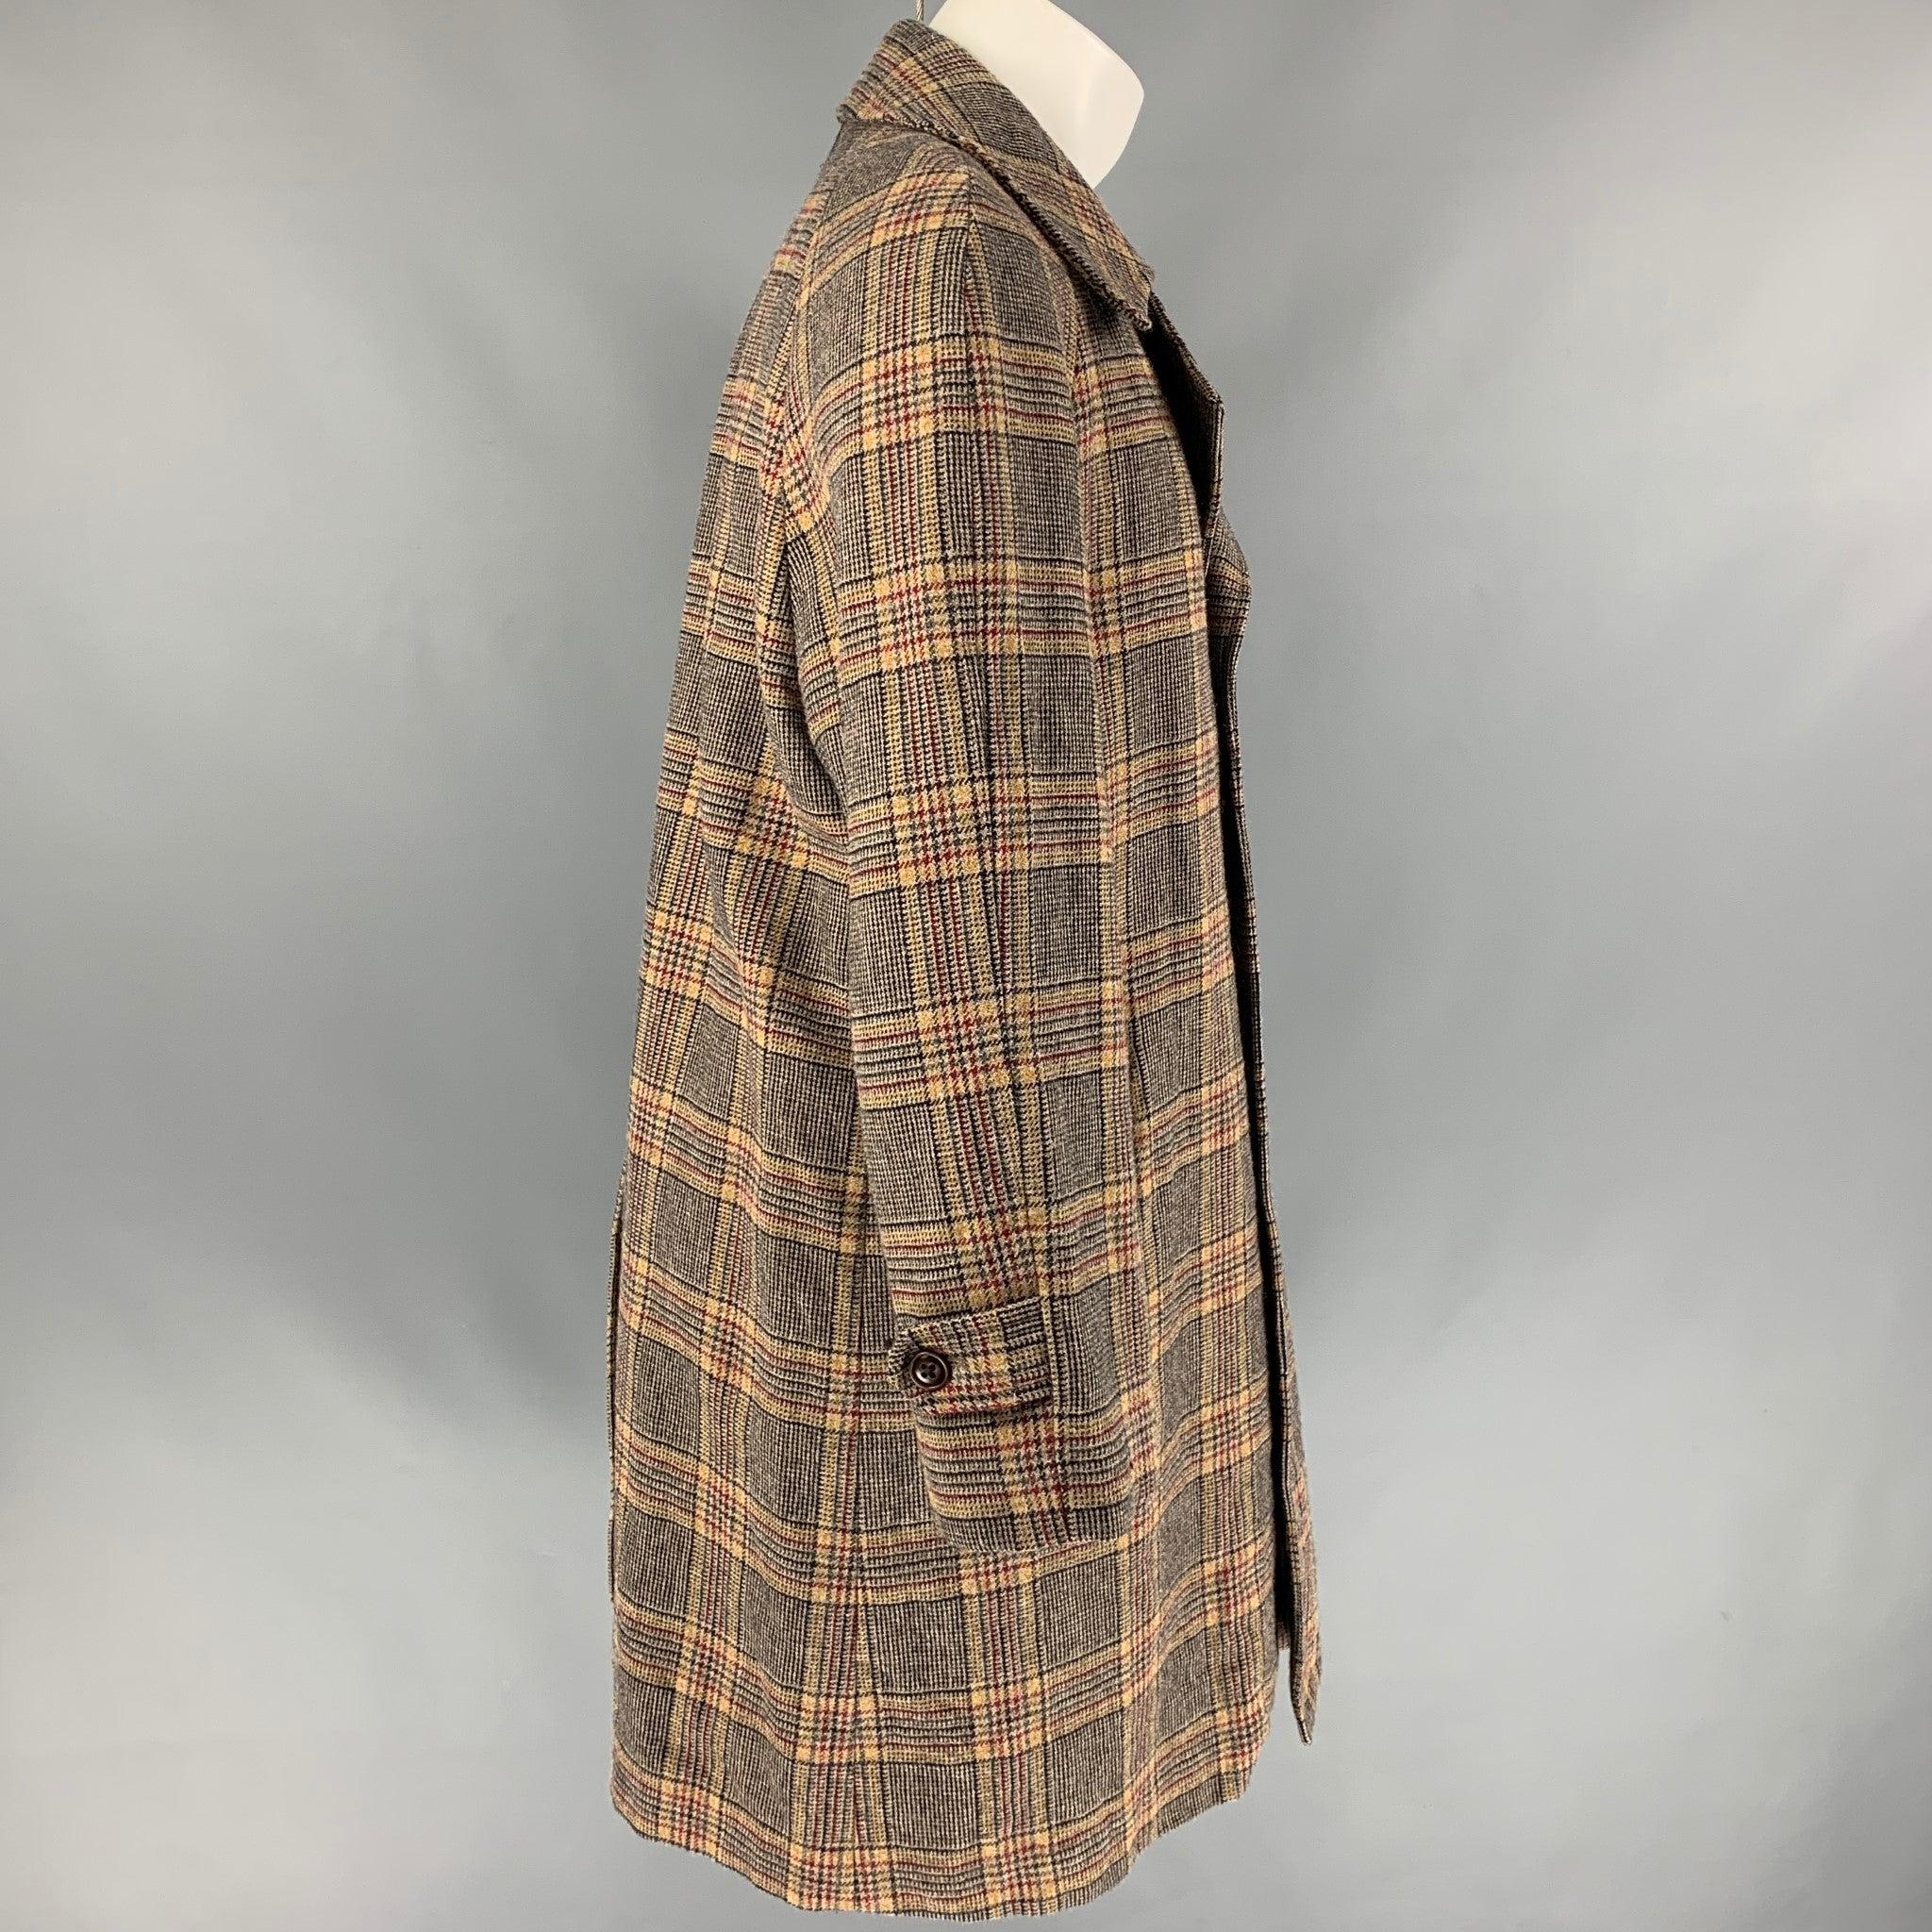 MARC JACOBS Size 38 Tan Plaid Wool Buttoned Coat In Good Condition For Sale In San Francisco, CA